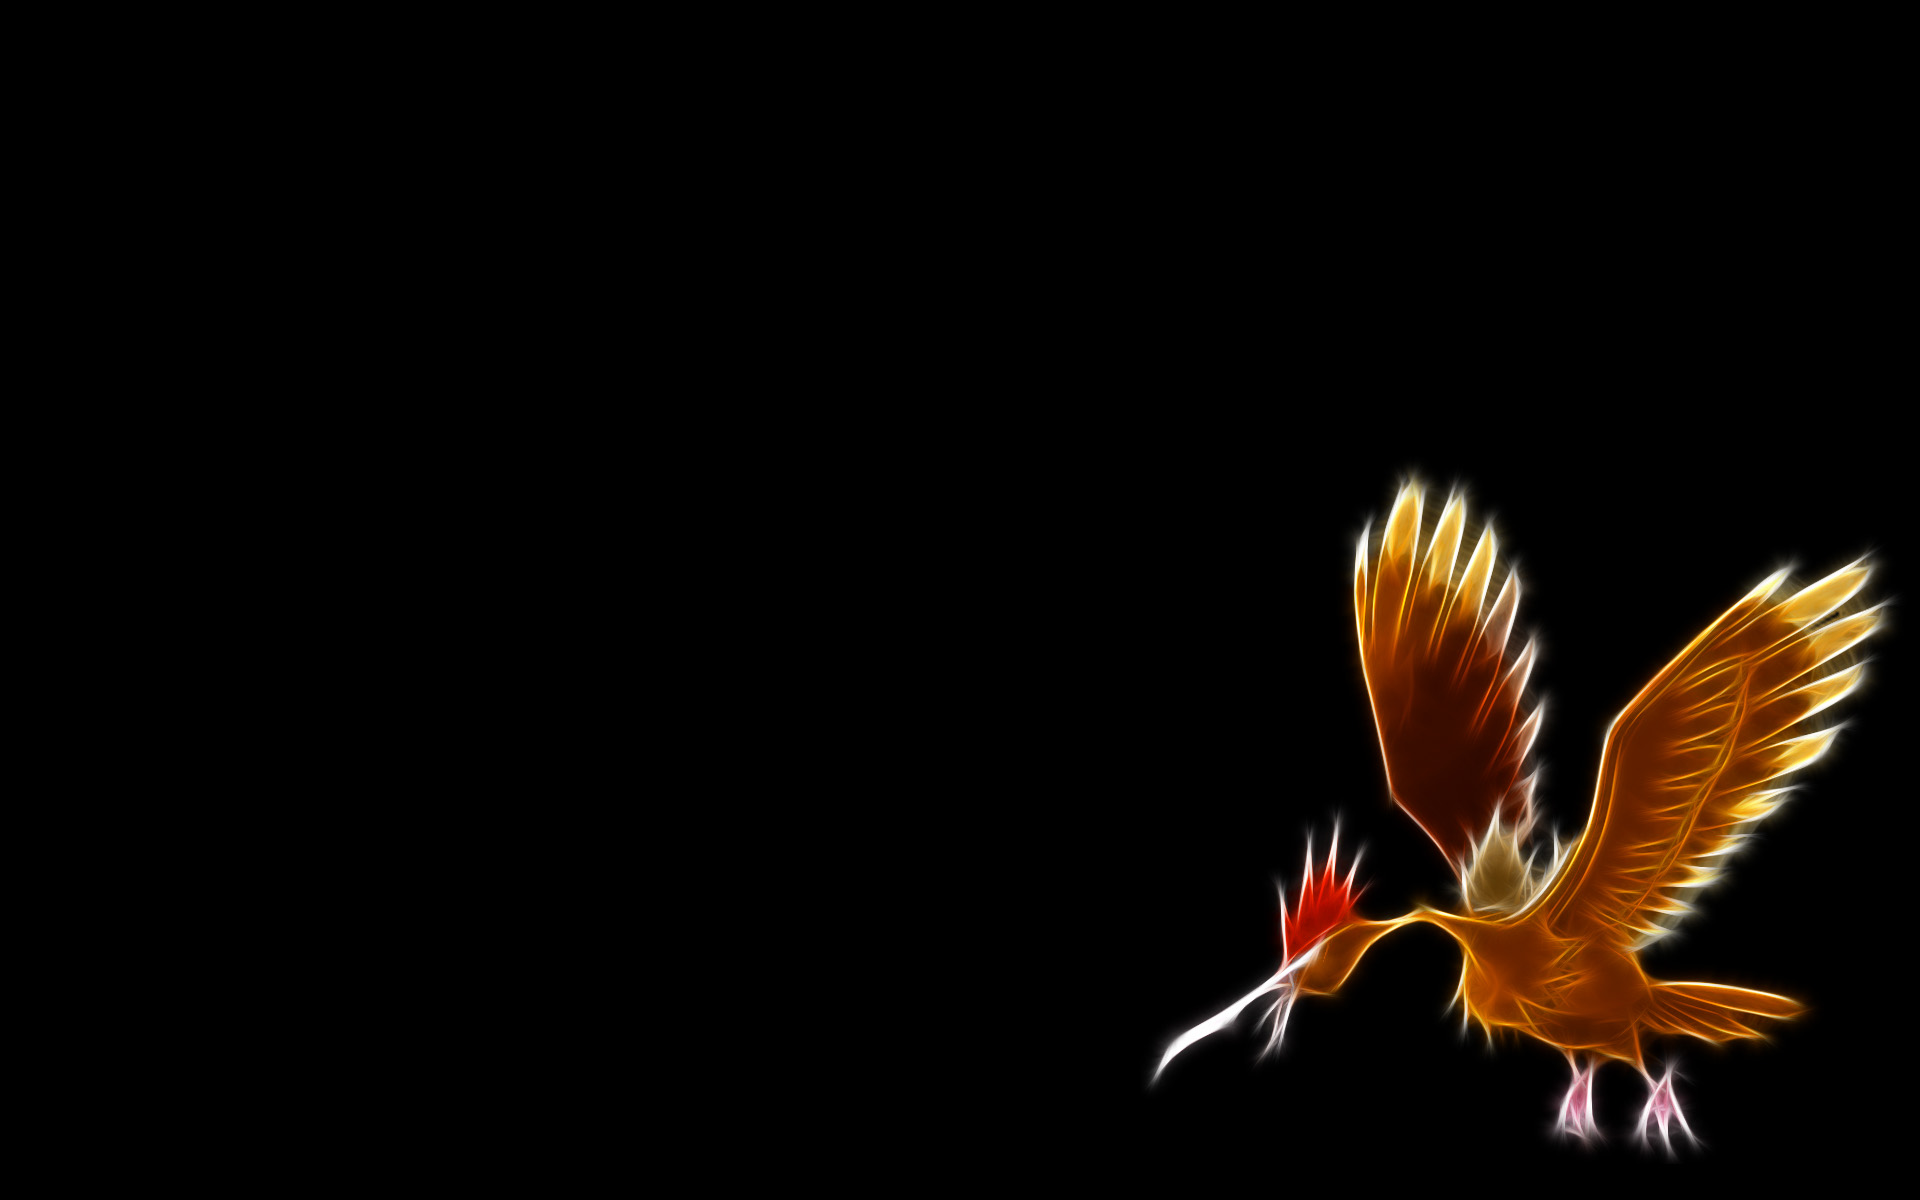 Fearow: living life, evolving, and trying to forget being hit with a rock.  Fearow spotting Ash: | By Pokémon | Facebook